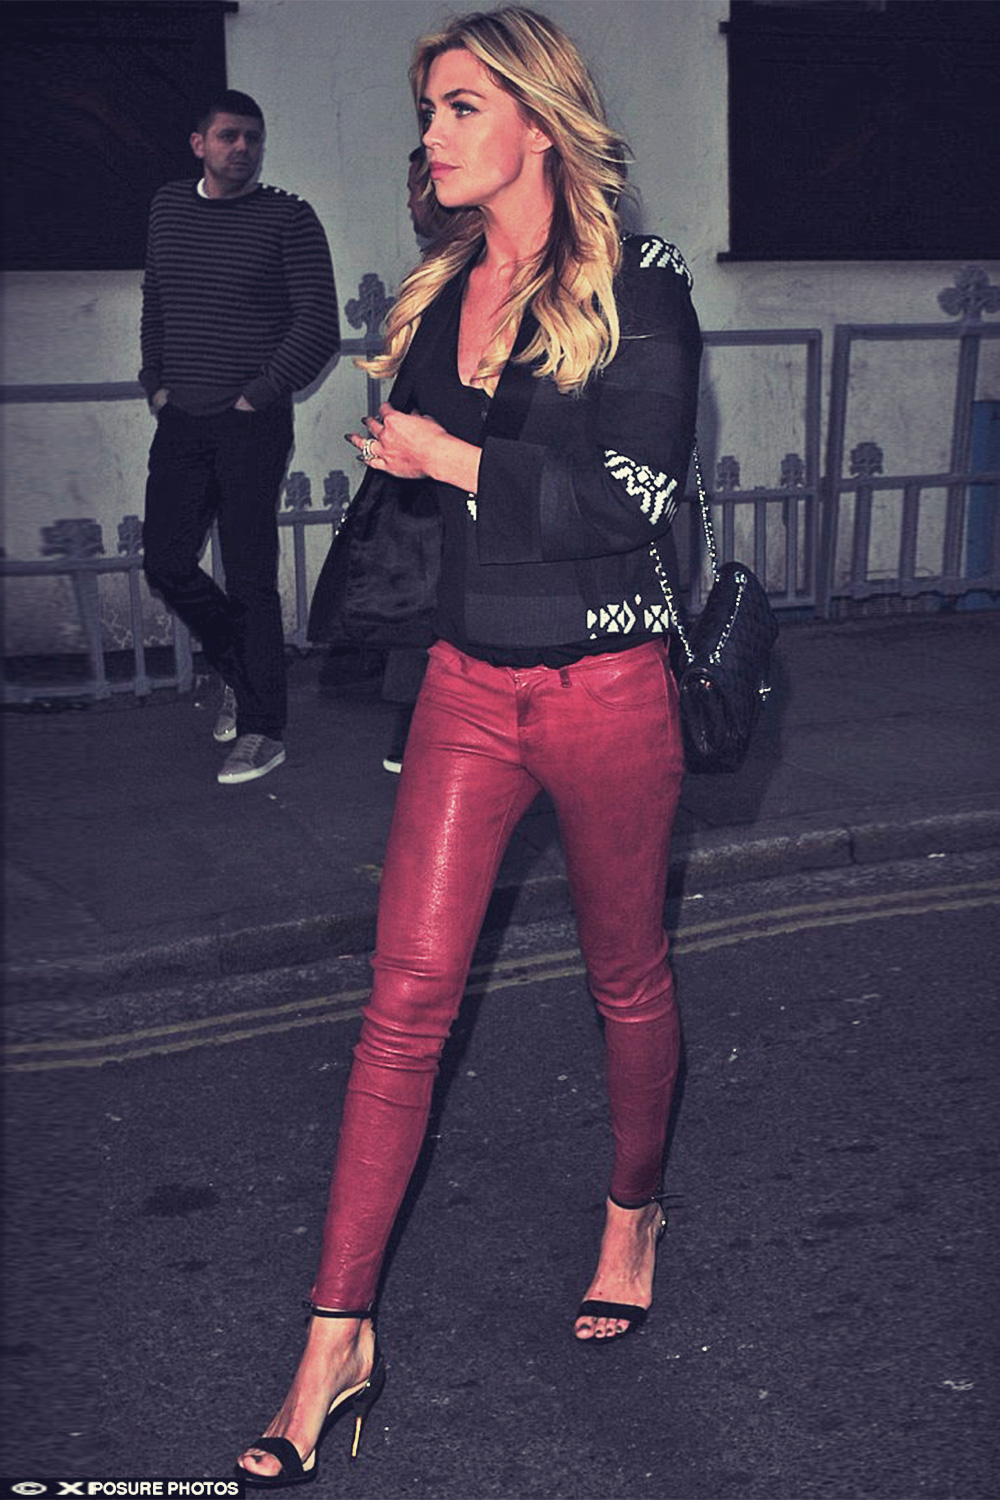 Abbey Clancy rocks red leather pants